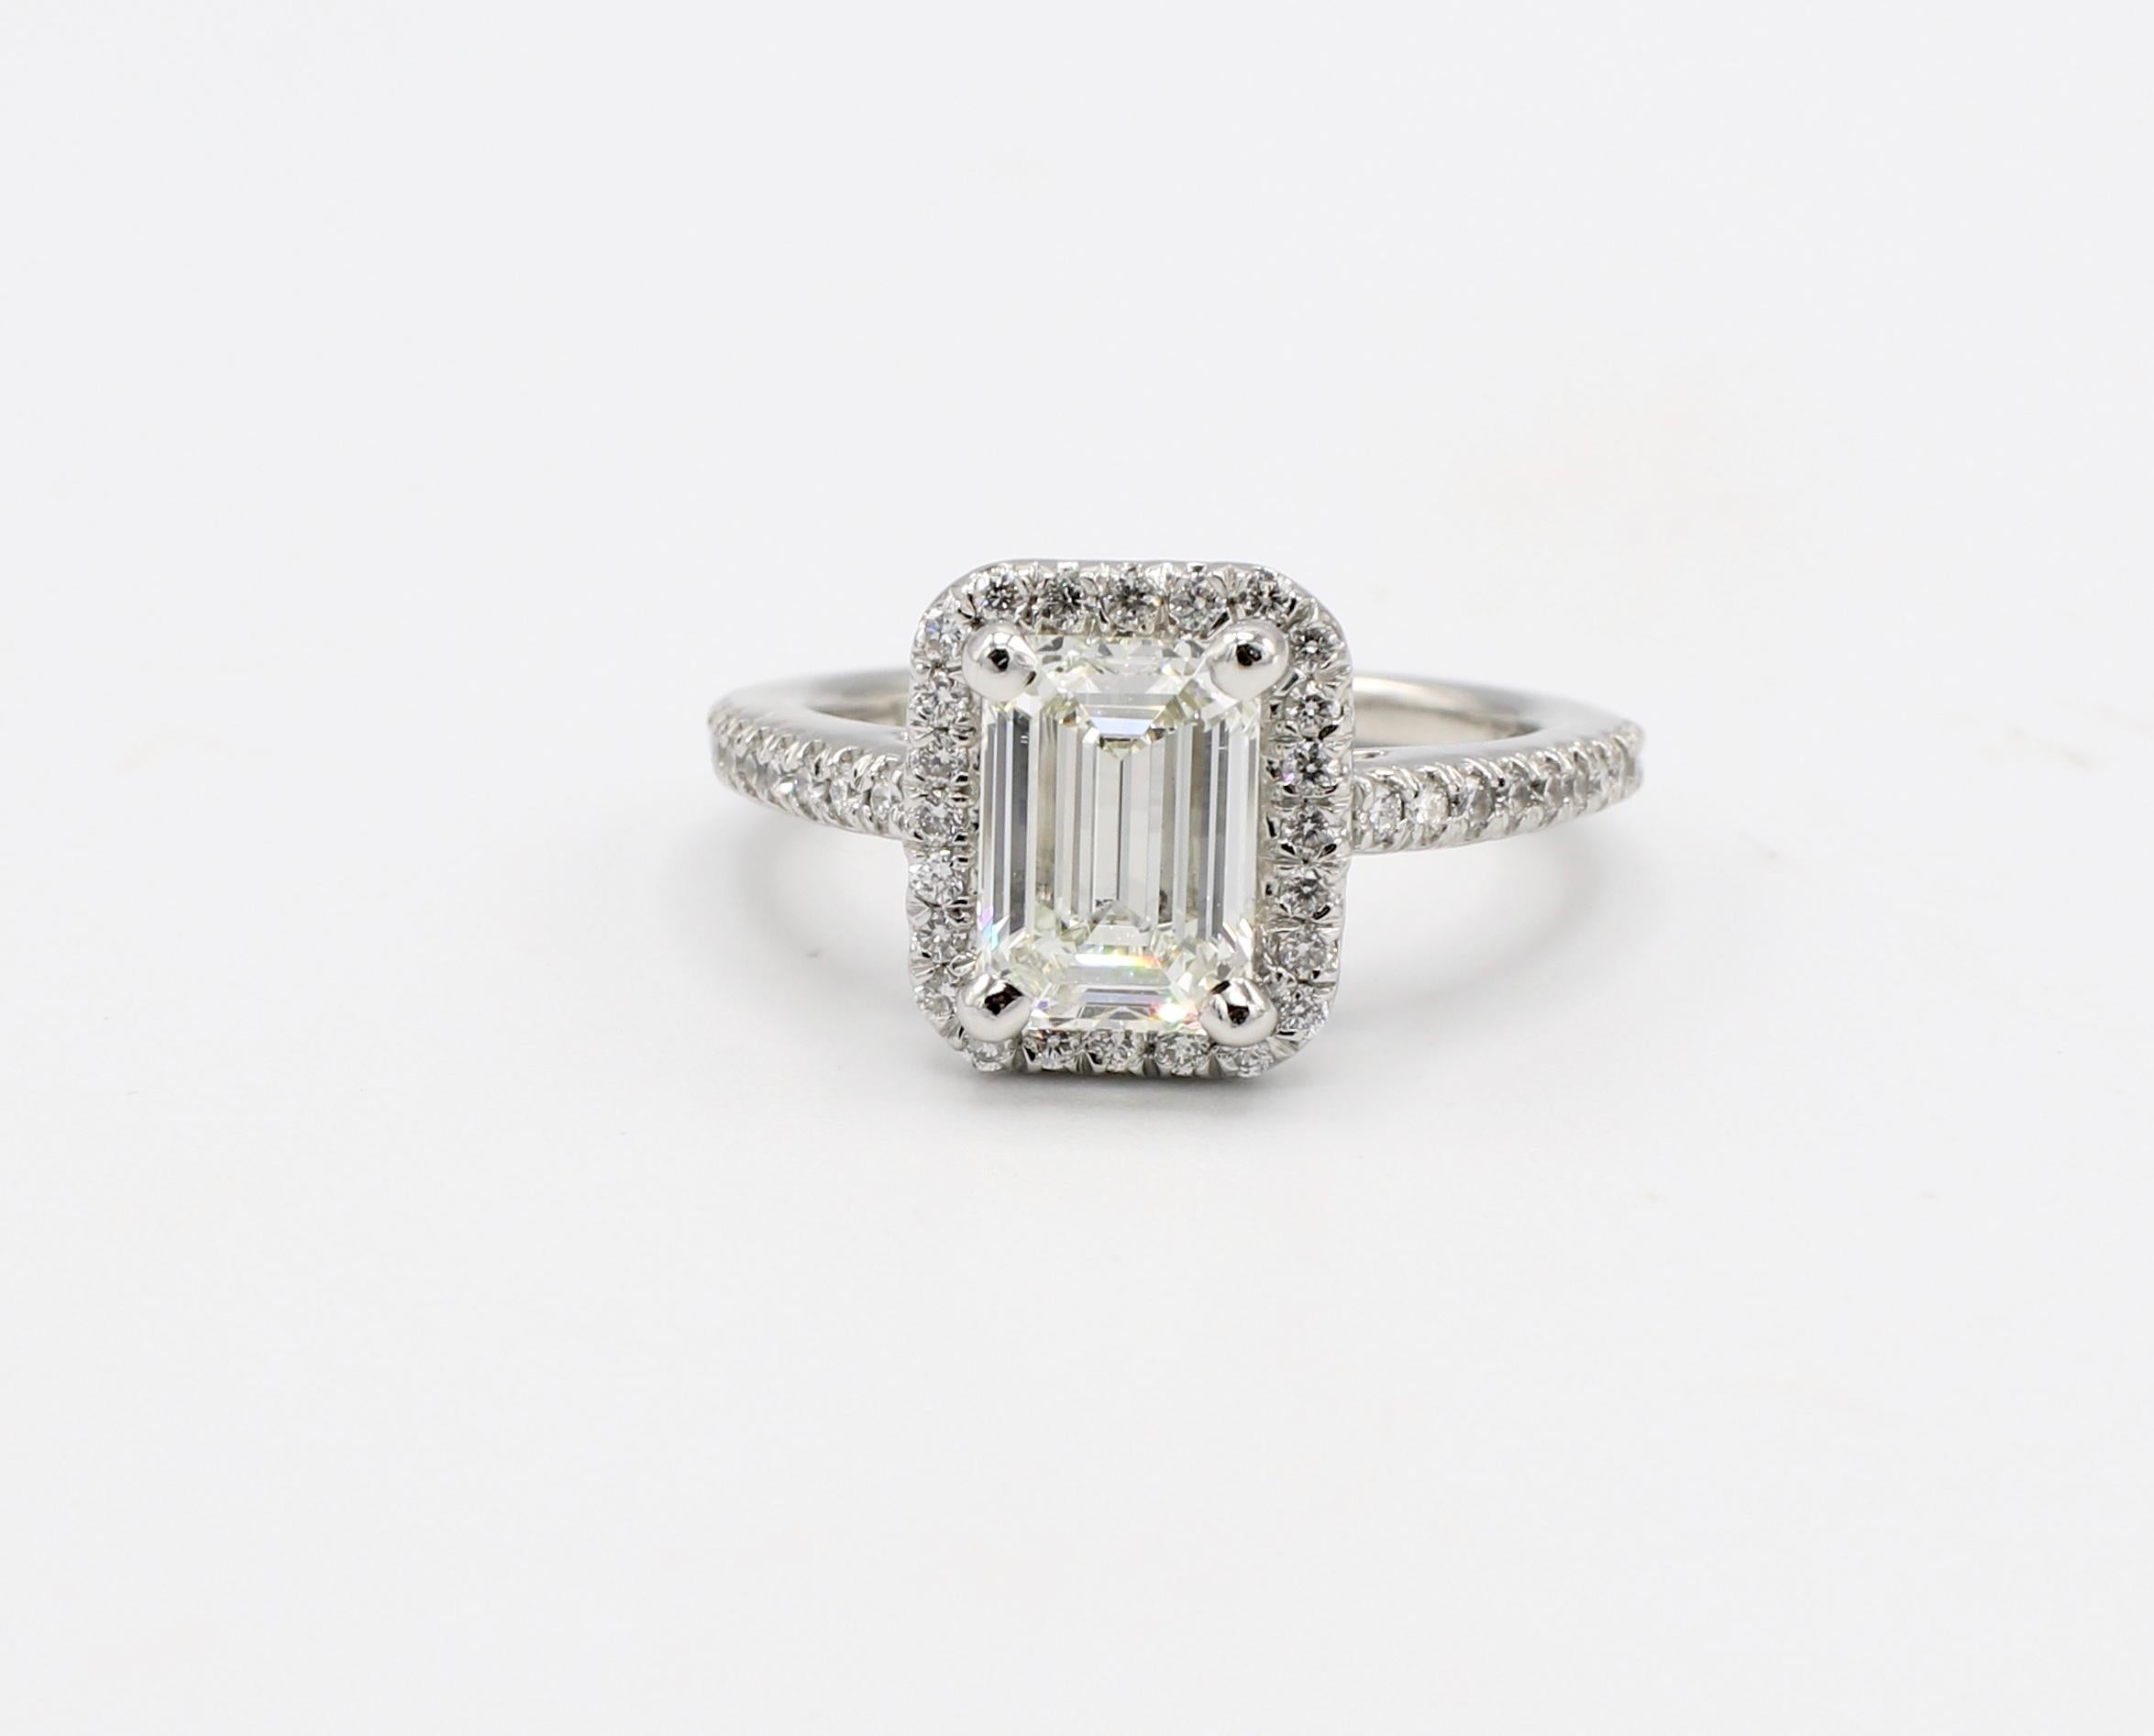 GIA Certified 1.43 I IF Carat Emerald Cut Halo Diamond Platinum Engagement Ring Size 4.5 

GIA Report Number: 5136532345 (please note picture of report copy for details)
Carat weight: 1.43 carat
Color: I
Clarity: Internally Flawless 
Polish: